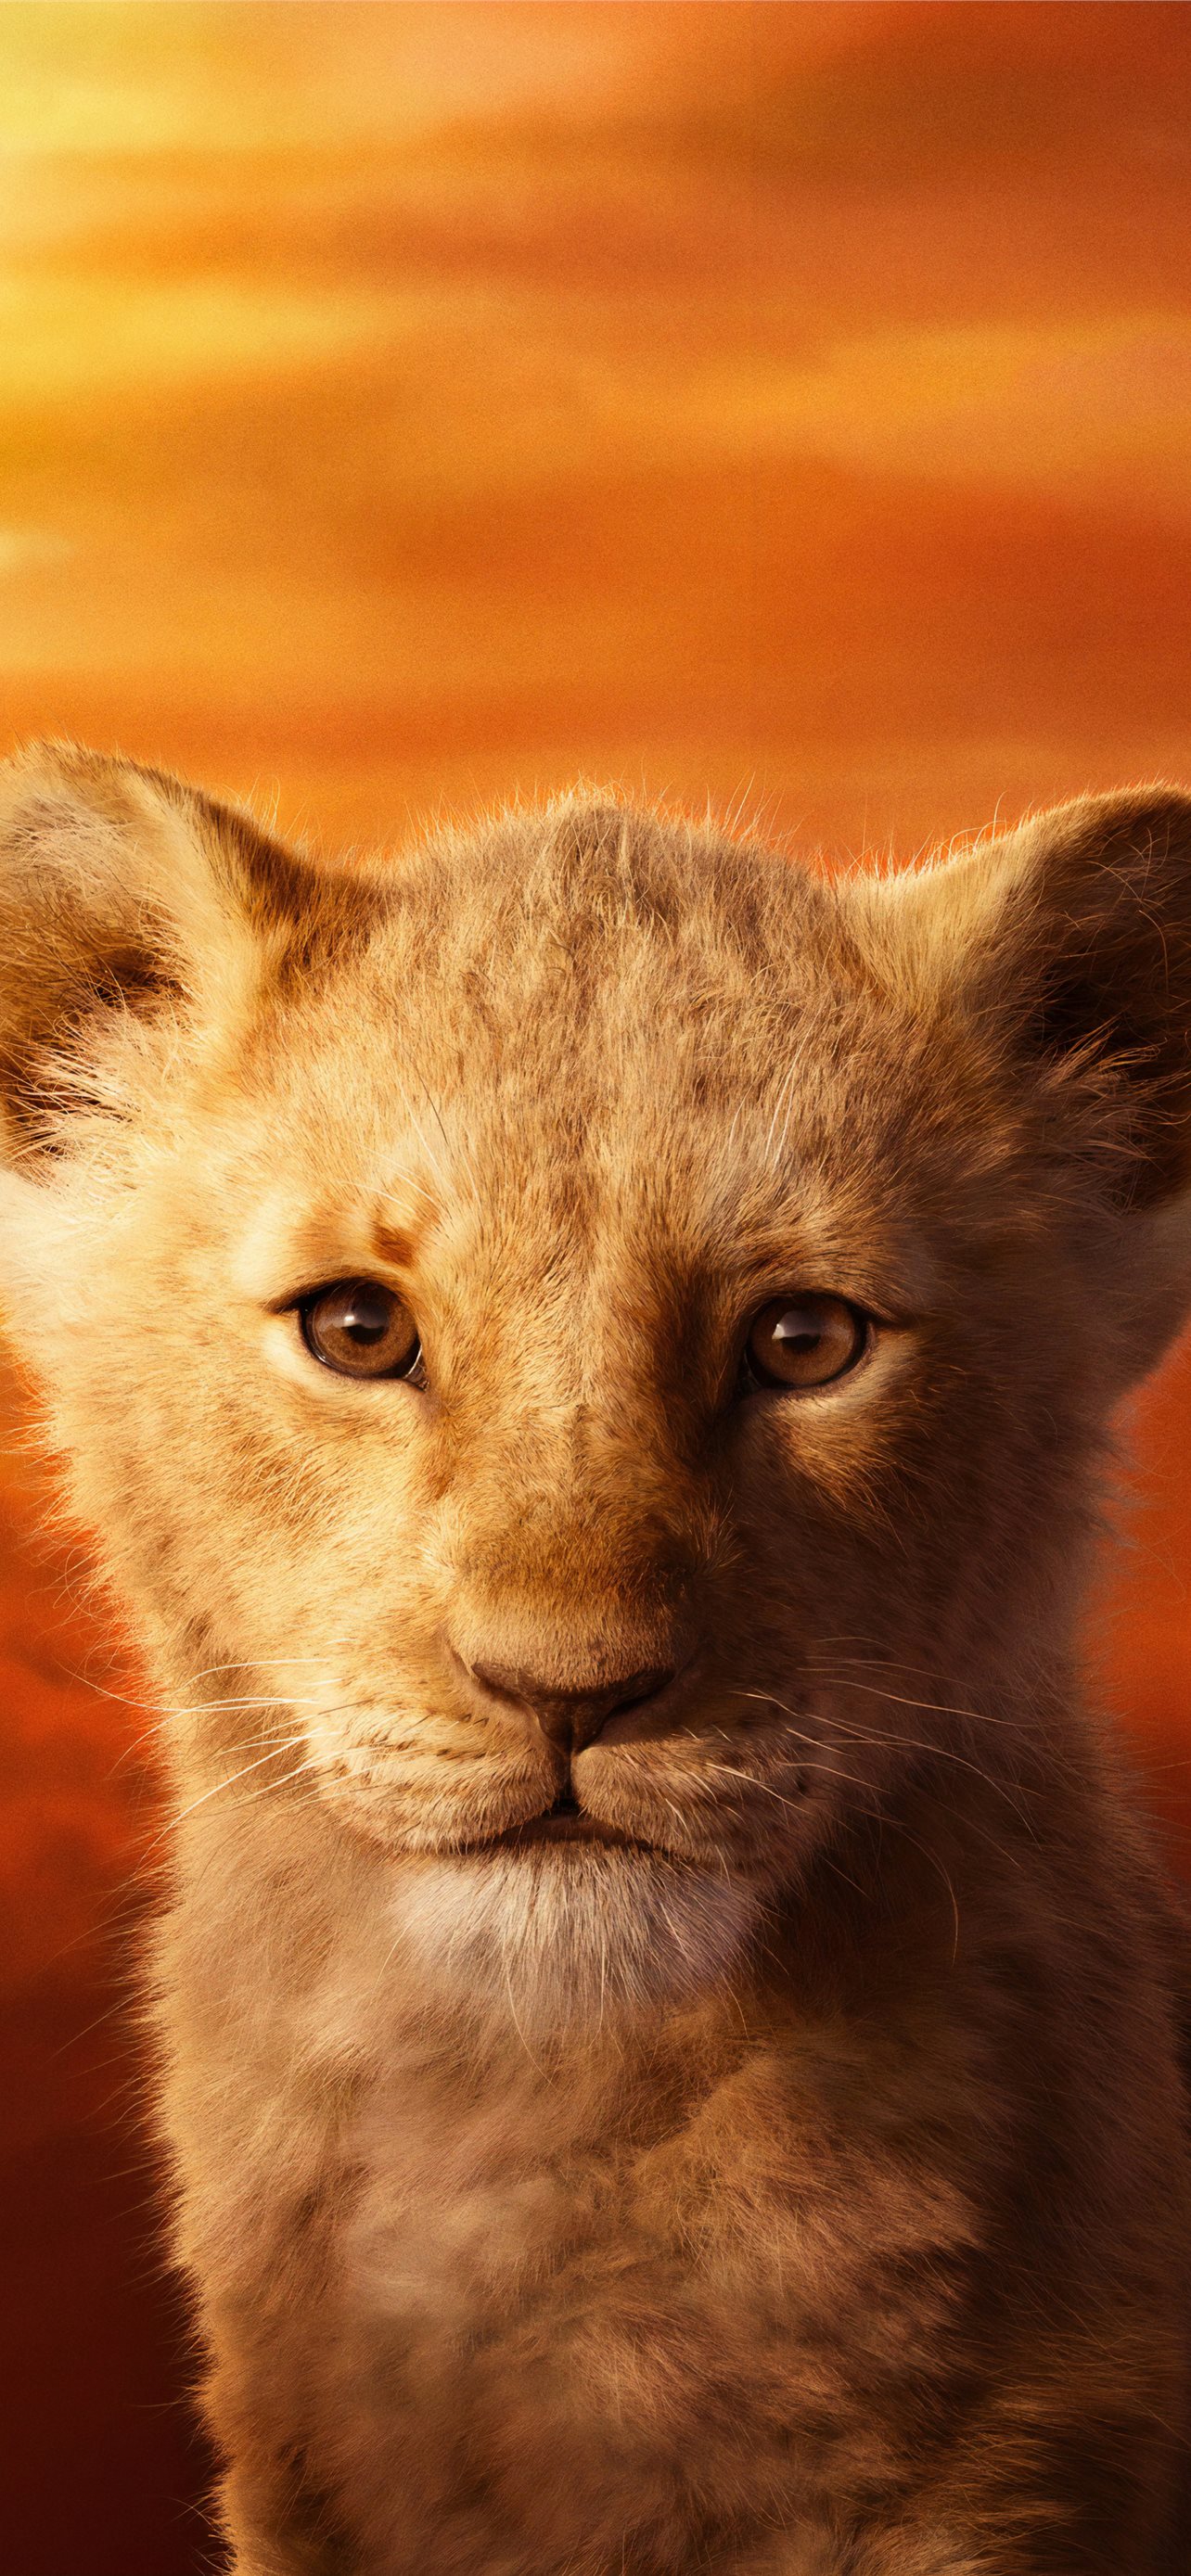 Jd Mccrary As Simba The Lion King 4k Sony Xpe iPhone